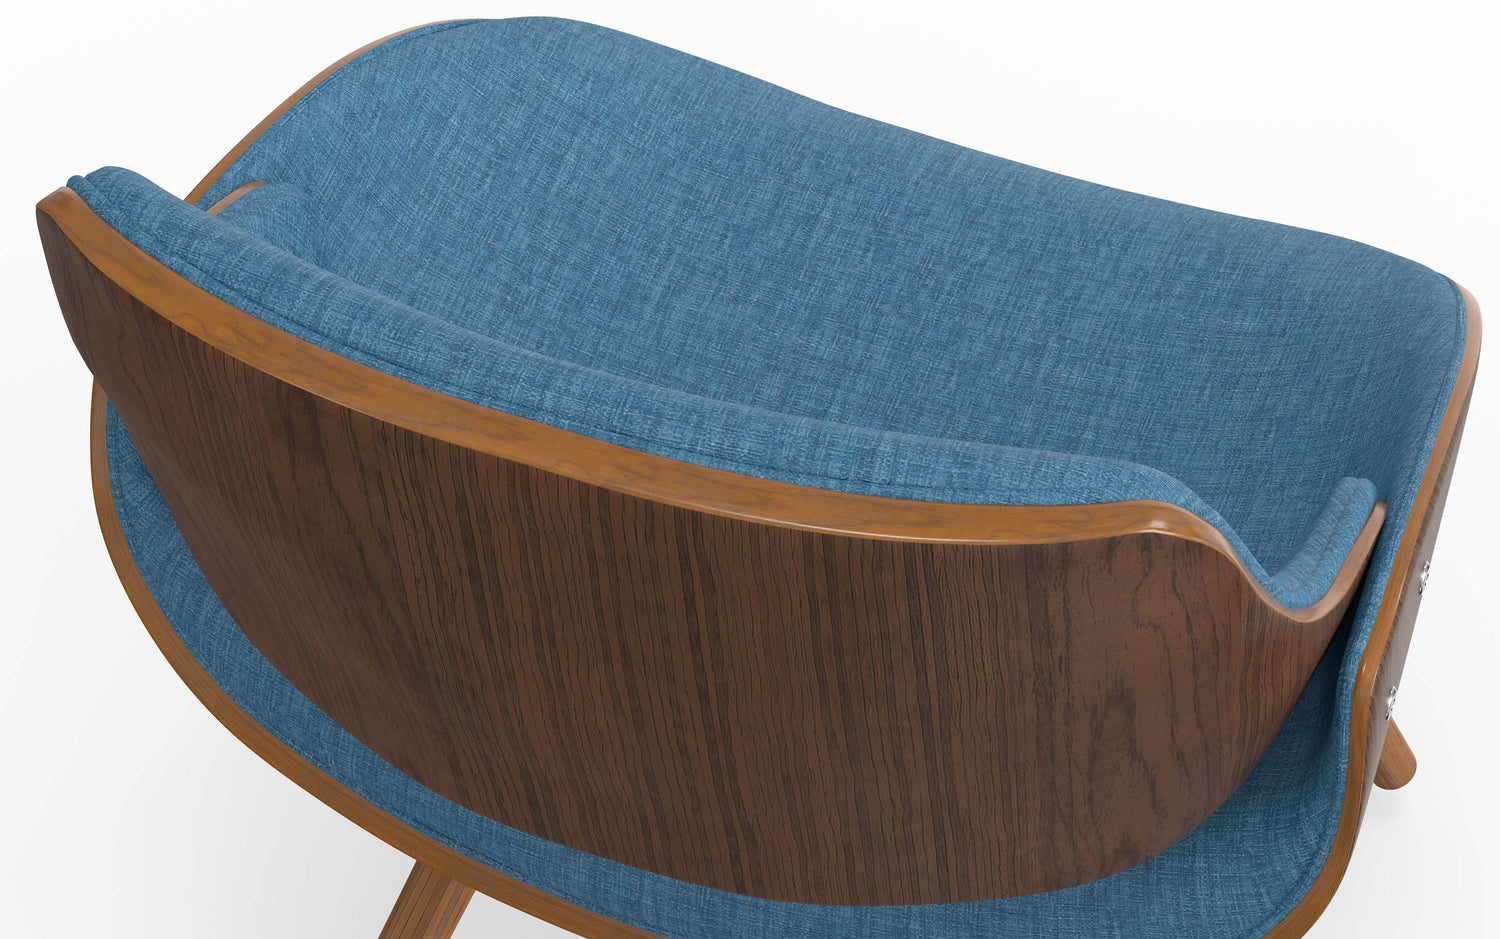 Blue Walnut Linen Style Fabric | Malden Dining Chair with Wood Back